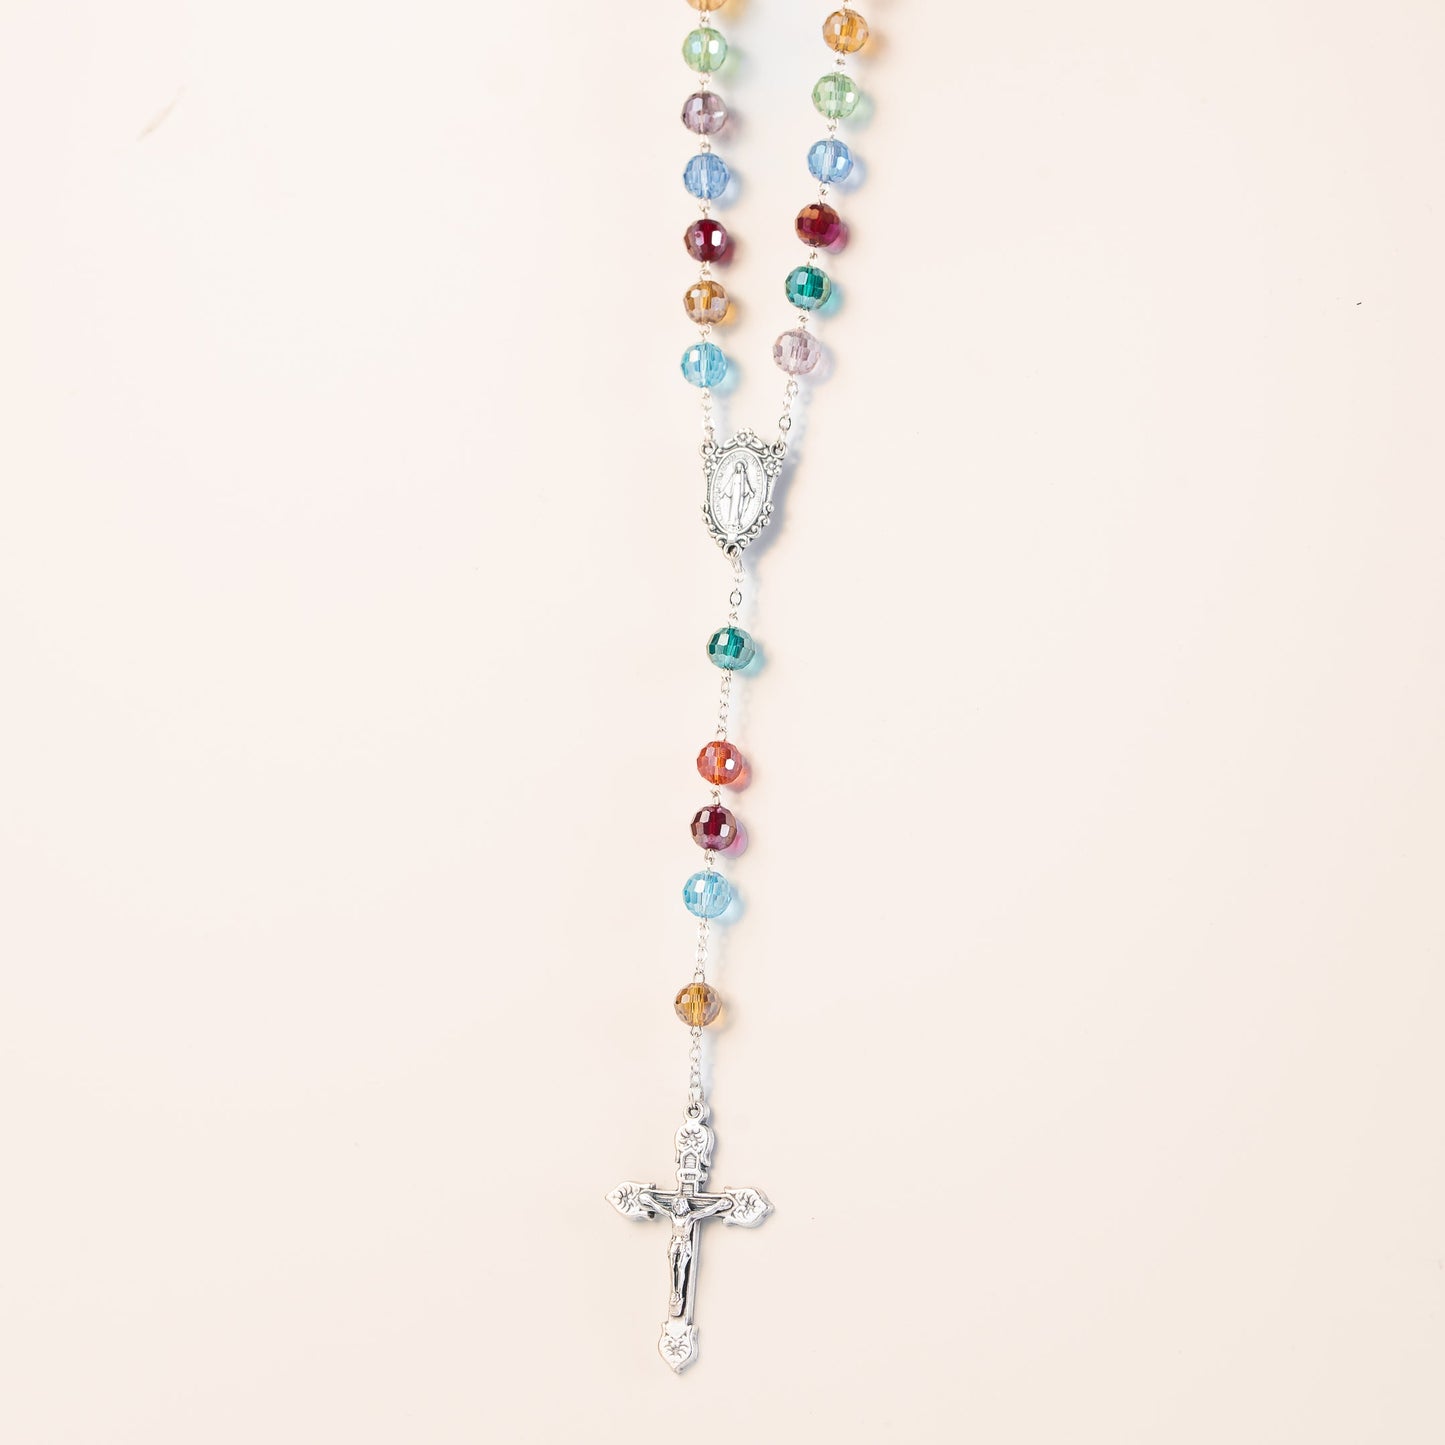 Multicolored crystal rosary